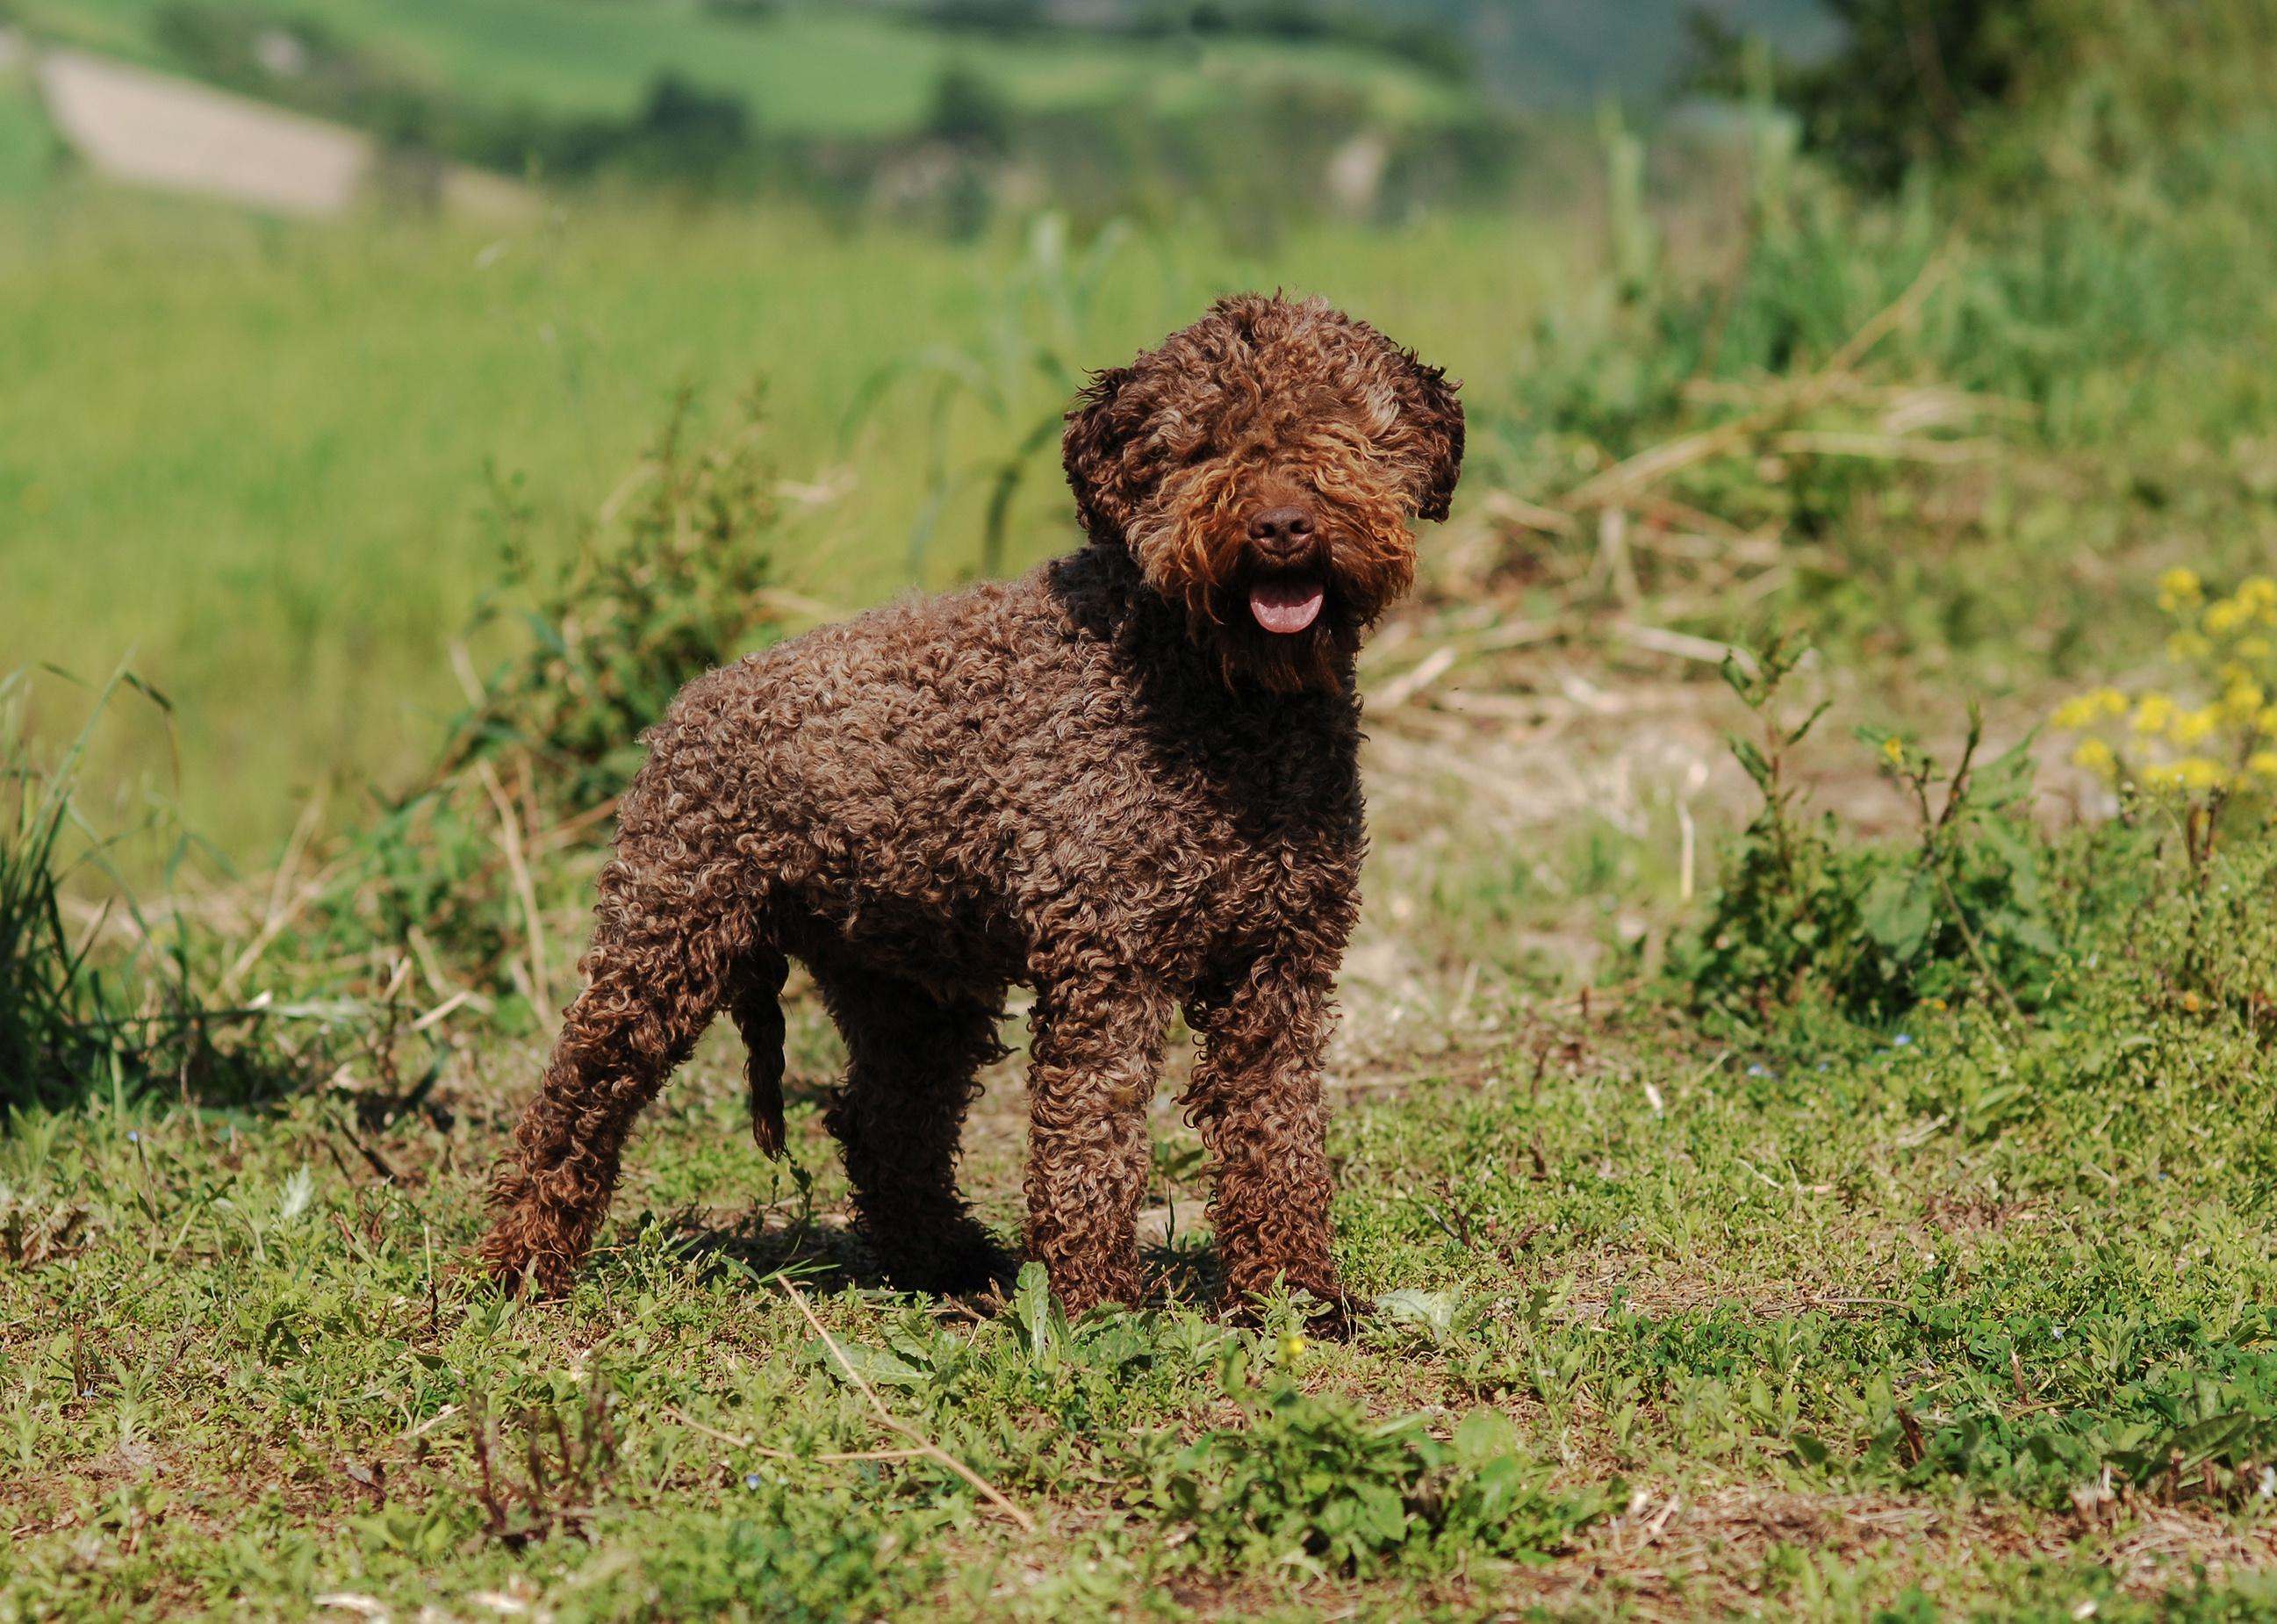 Lagotto Romagnolo truffle dog standing in grassy outdoors.